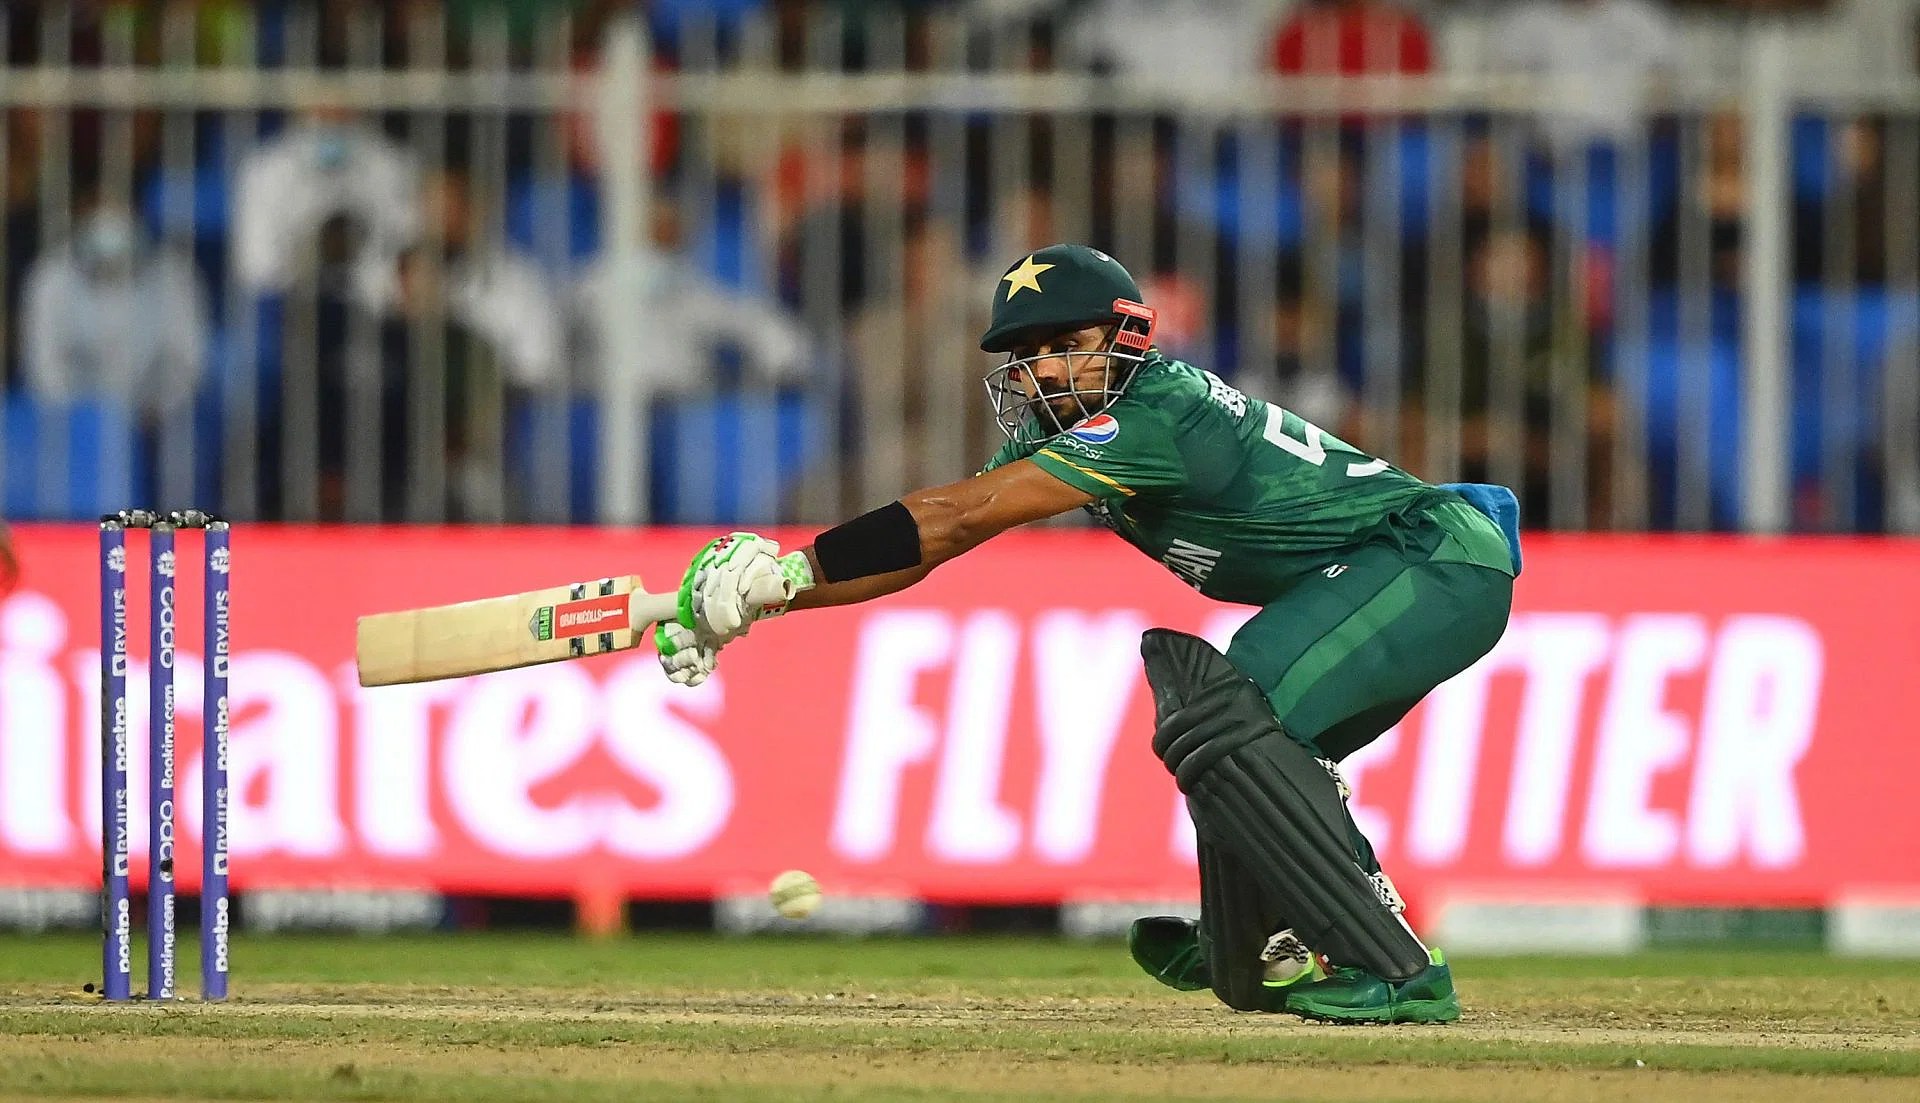 PAK vs ENG: Is Pakistan captain Babar Azam England's biggest worry? Check his insane numbers against English side, ICC T20 World Cup, PAK vs ENG LIVE